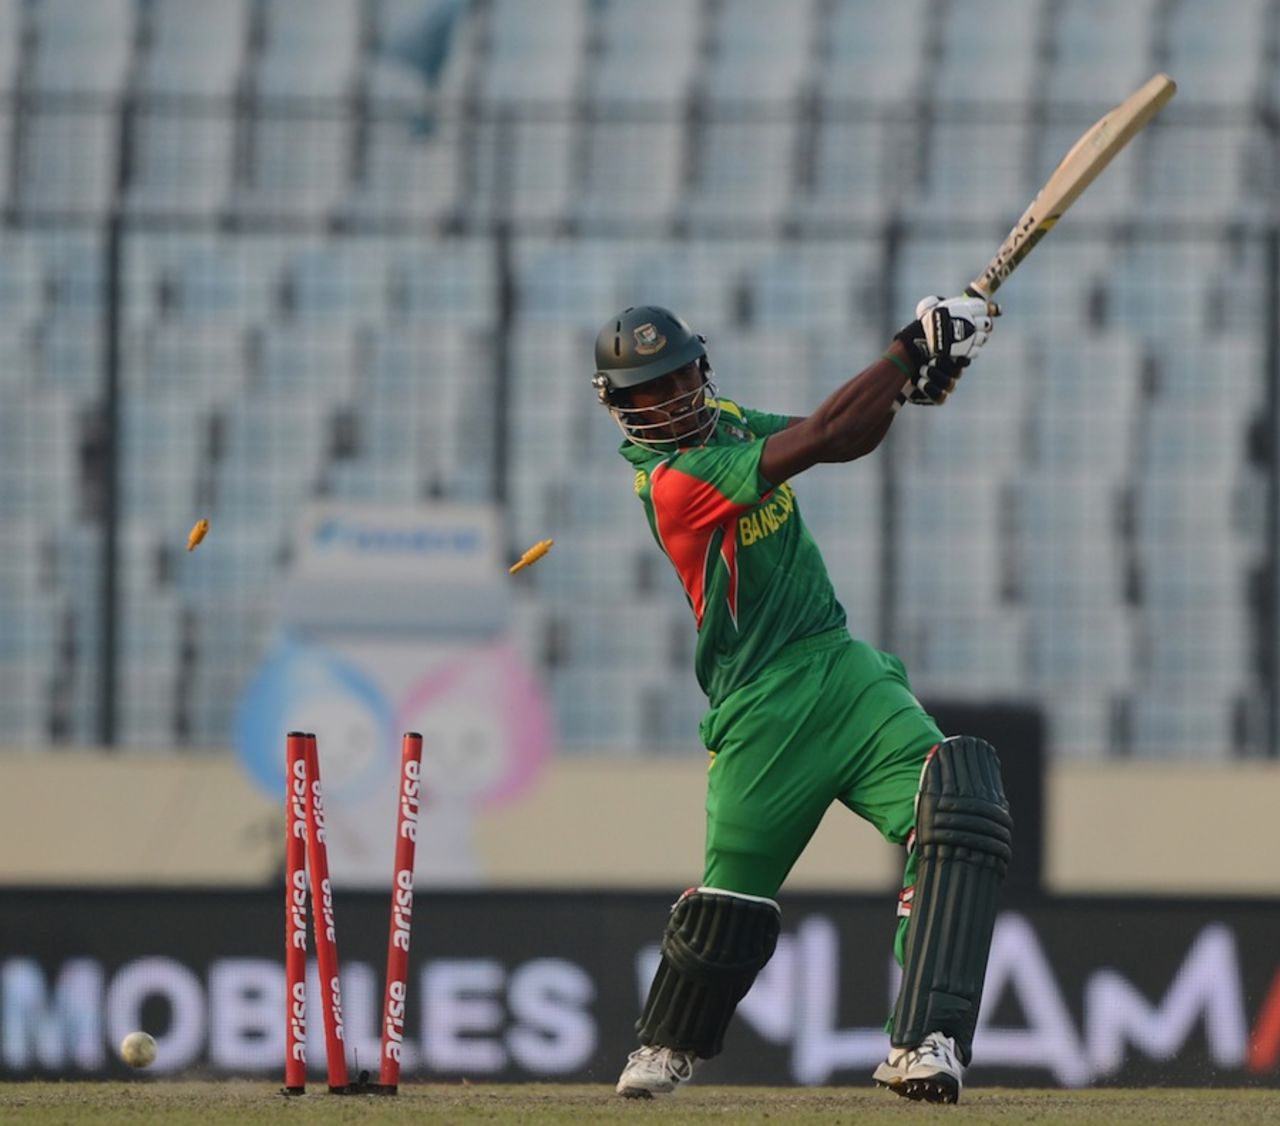 Rubel Hossain was bowled in the last over, Bangladesh v Sri Lanka, Asia Cup, Mirpur, March 6, 2014